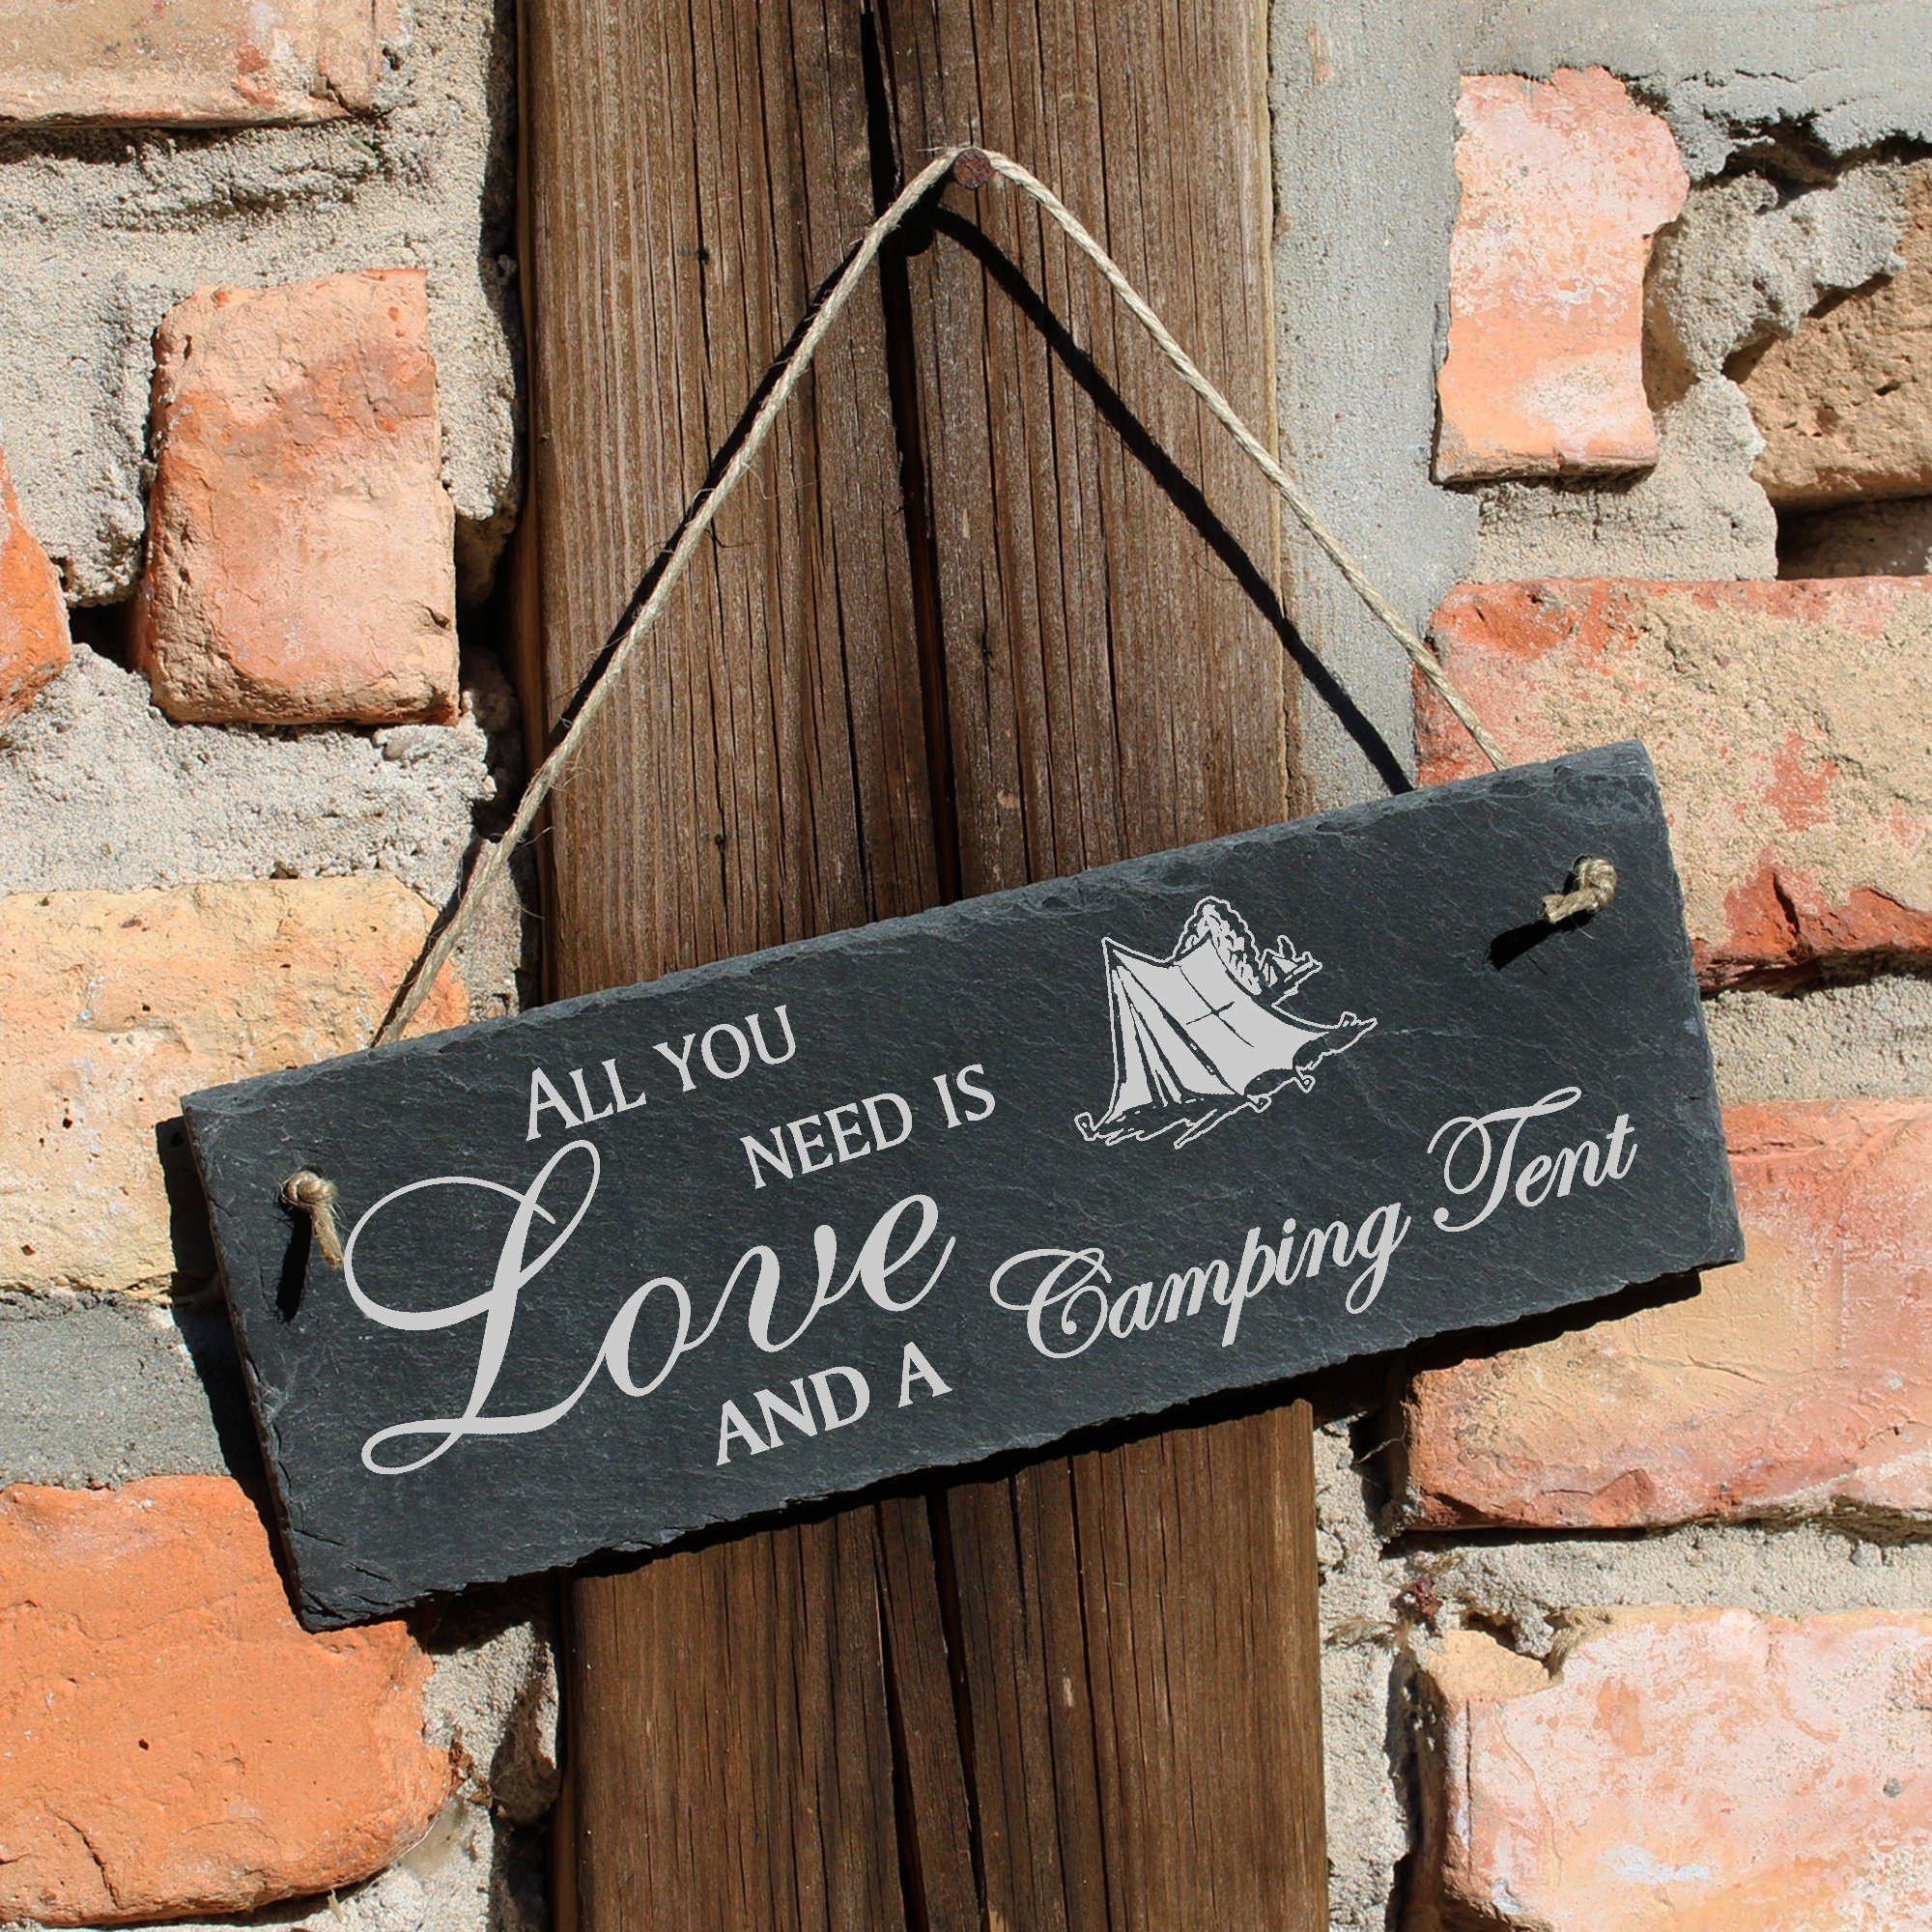 Dekolando Hängedekoration Campingzelt All you Camping is and Tent need 22x8cm a Love